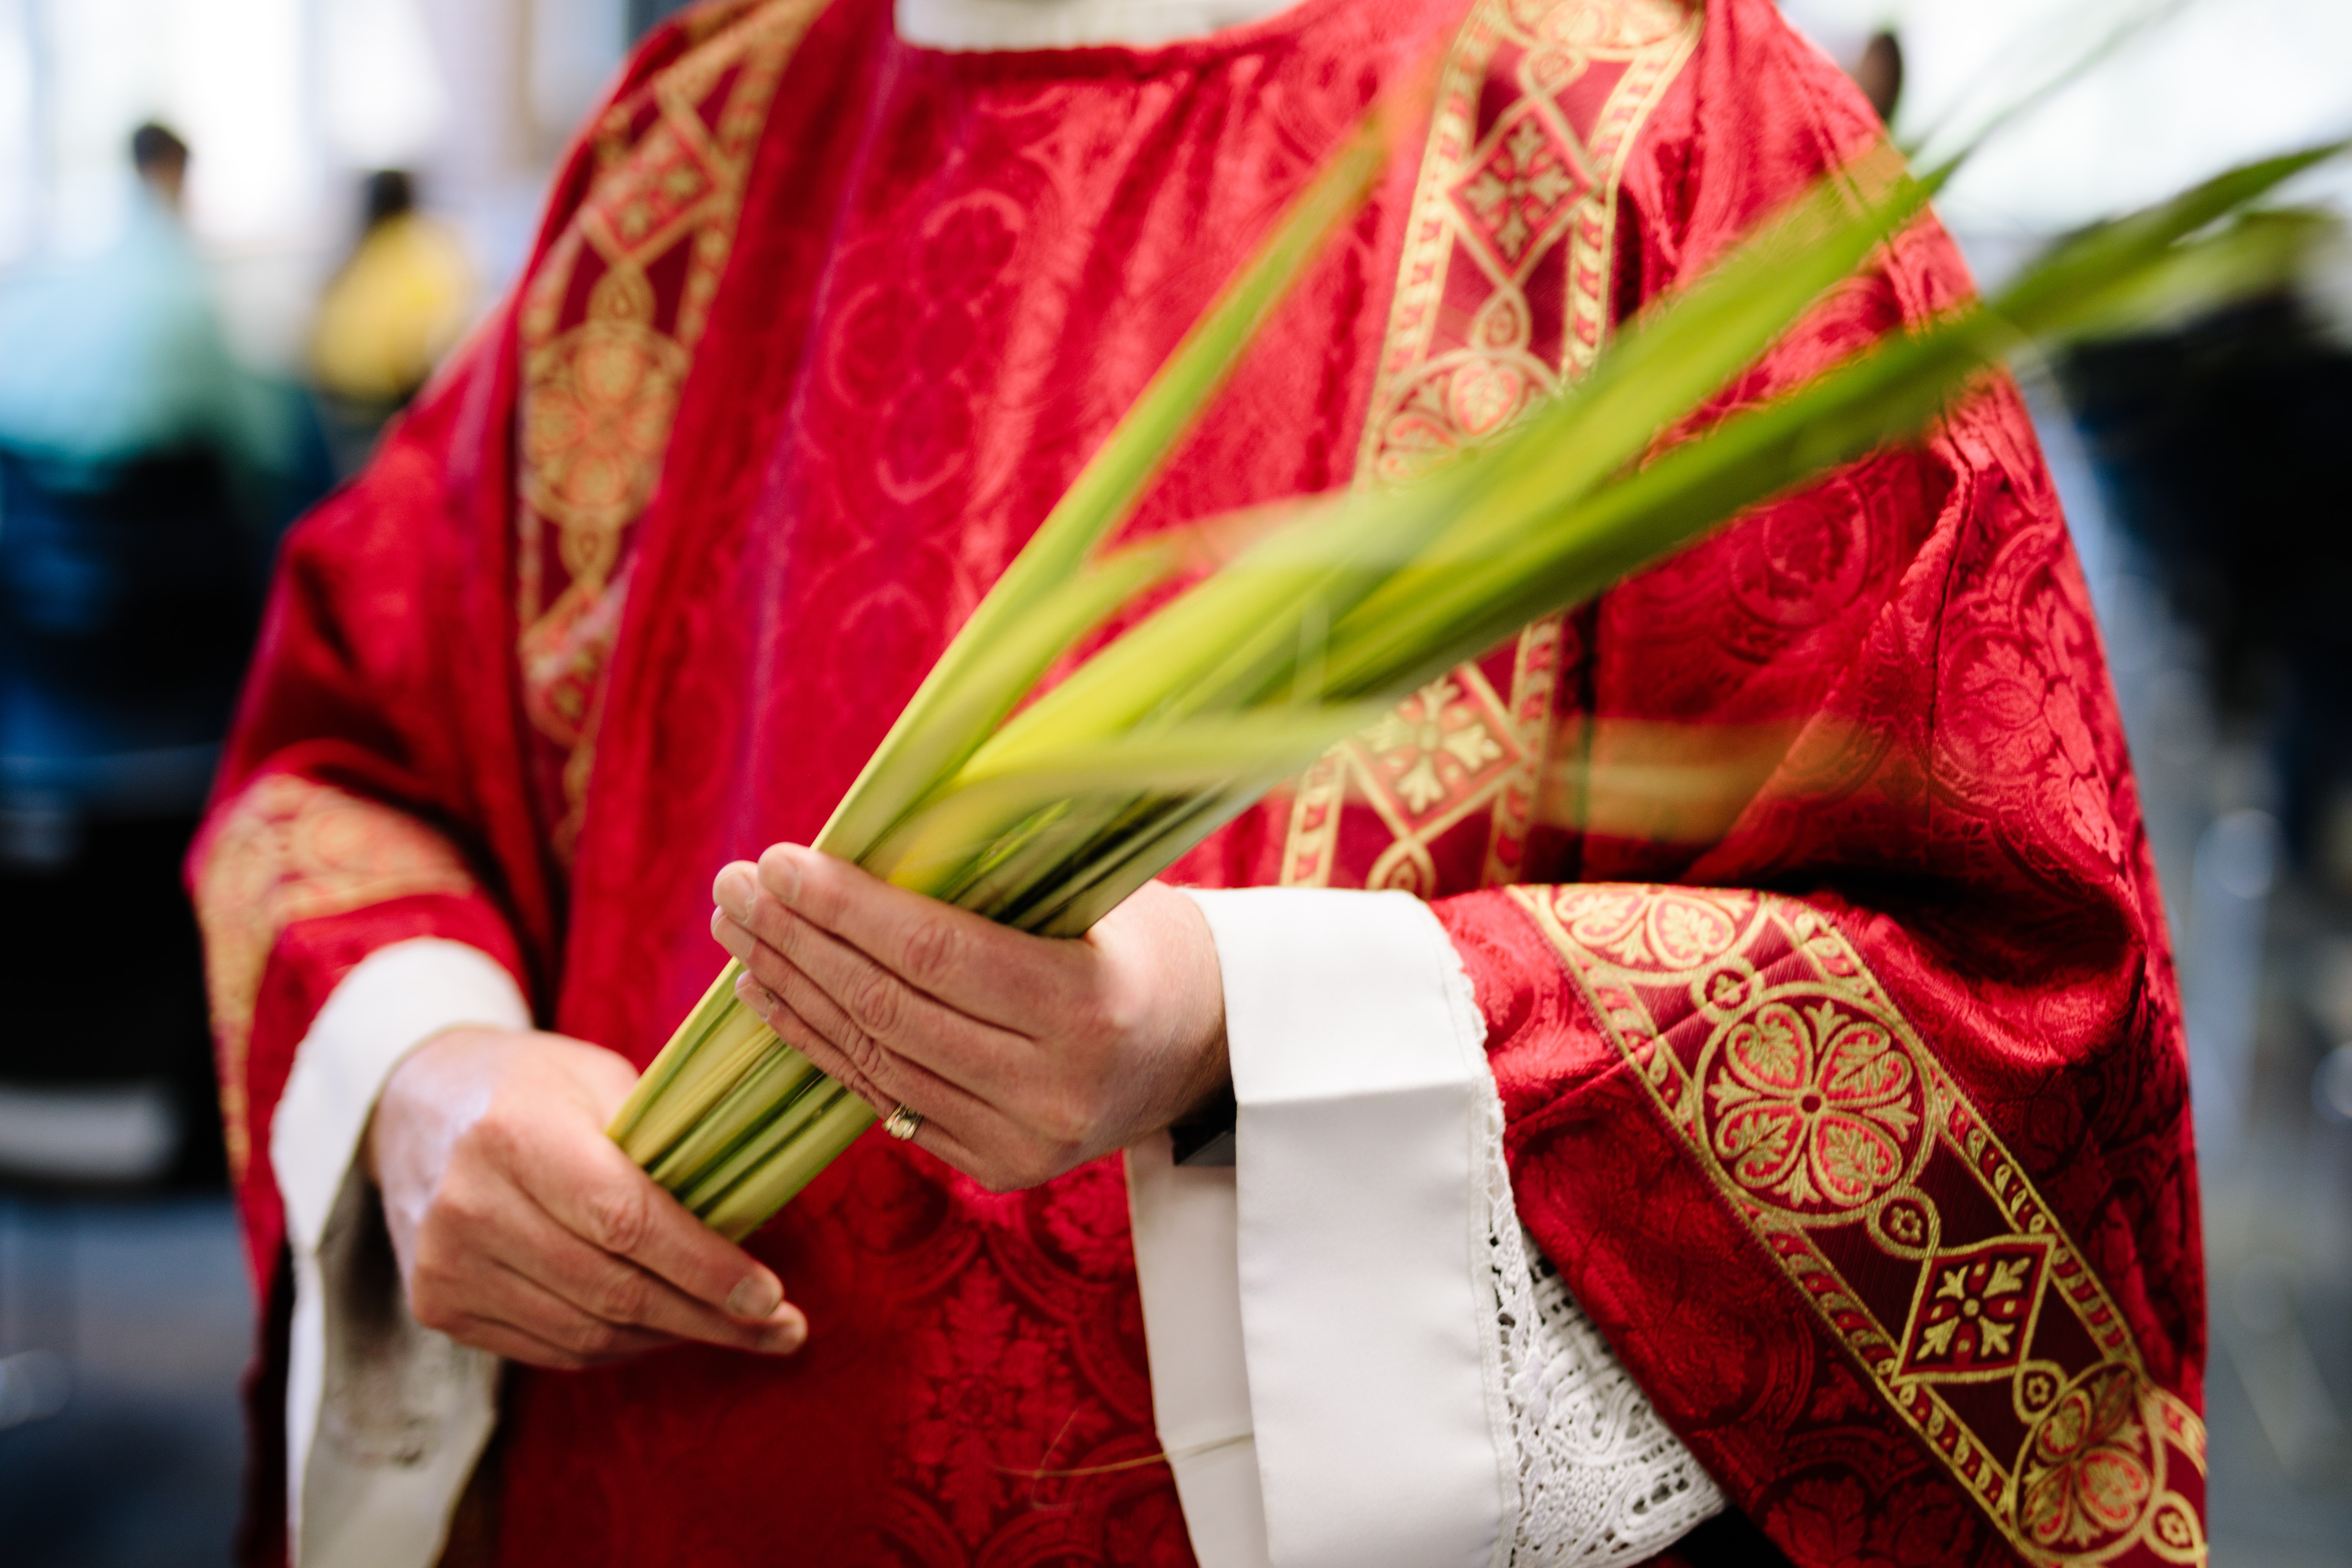 A priest taking part in the Palm Sunday Procession